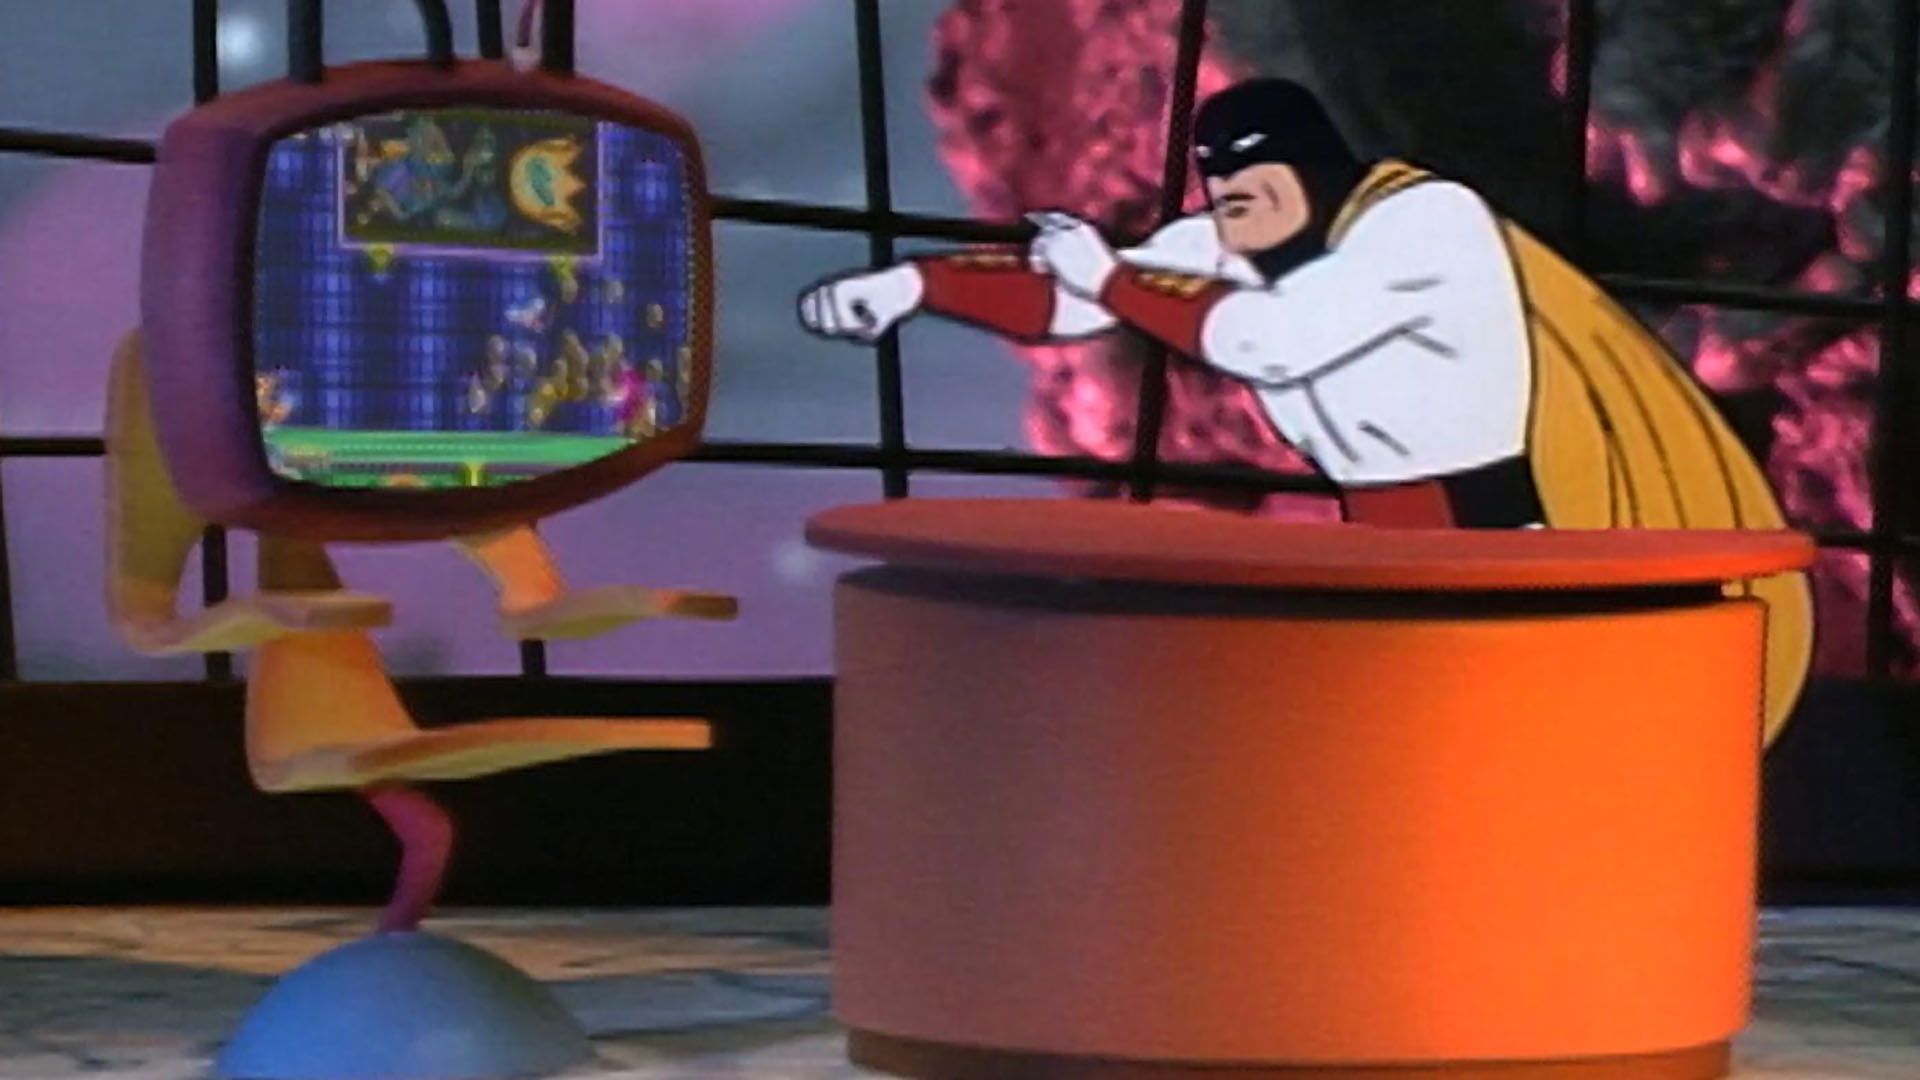 Space Ghost Coast To Coast Wallpapers